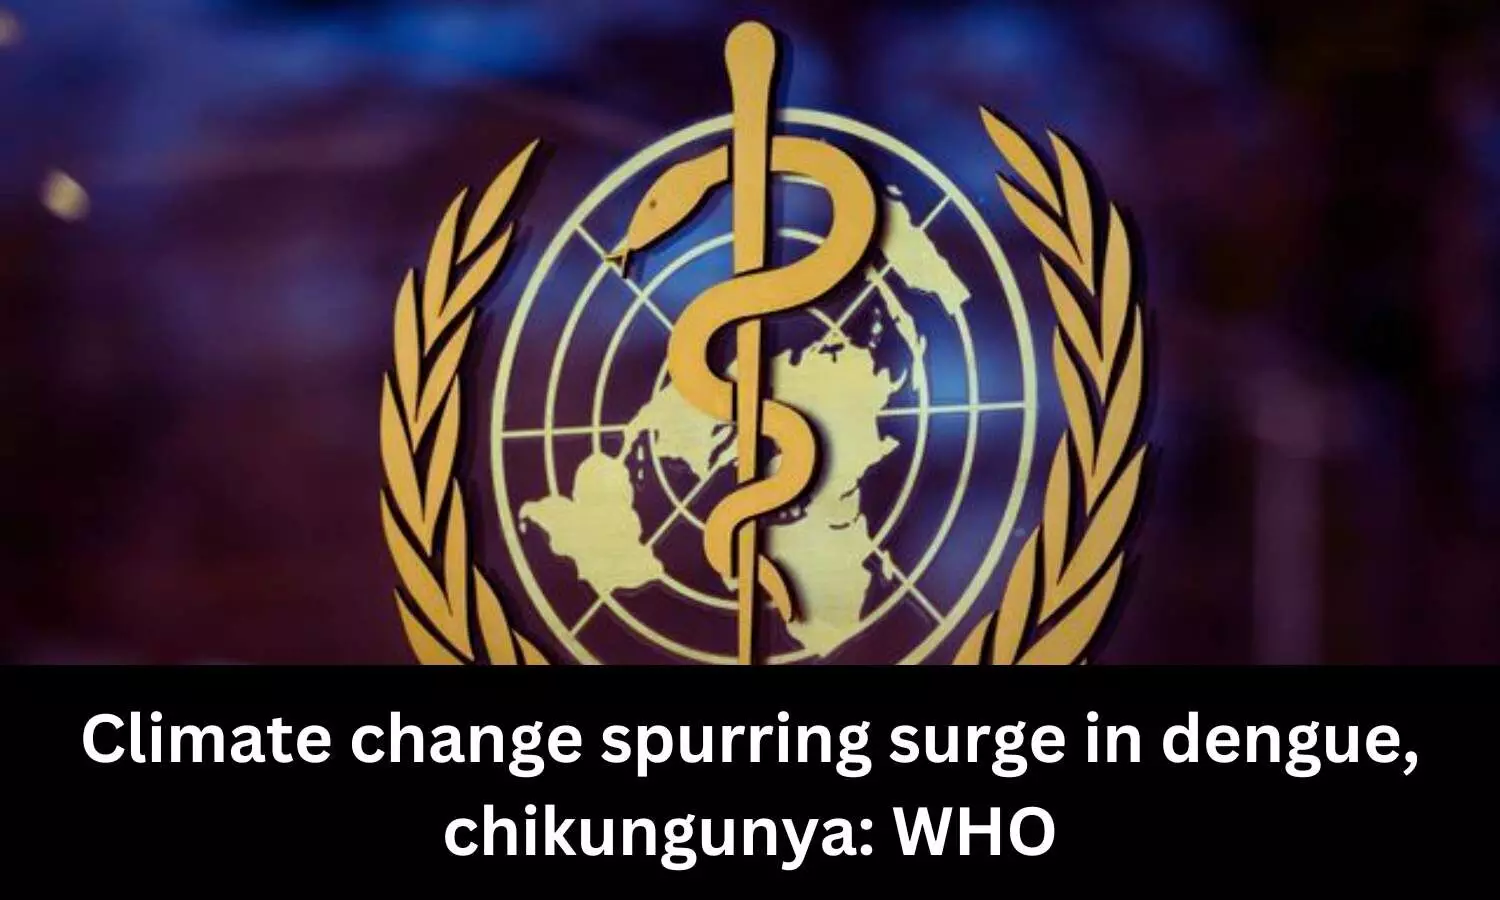 Climate change spurring surge in dengue, chikungunya: WHO